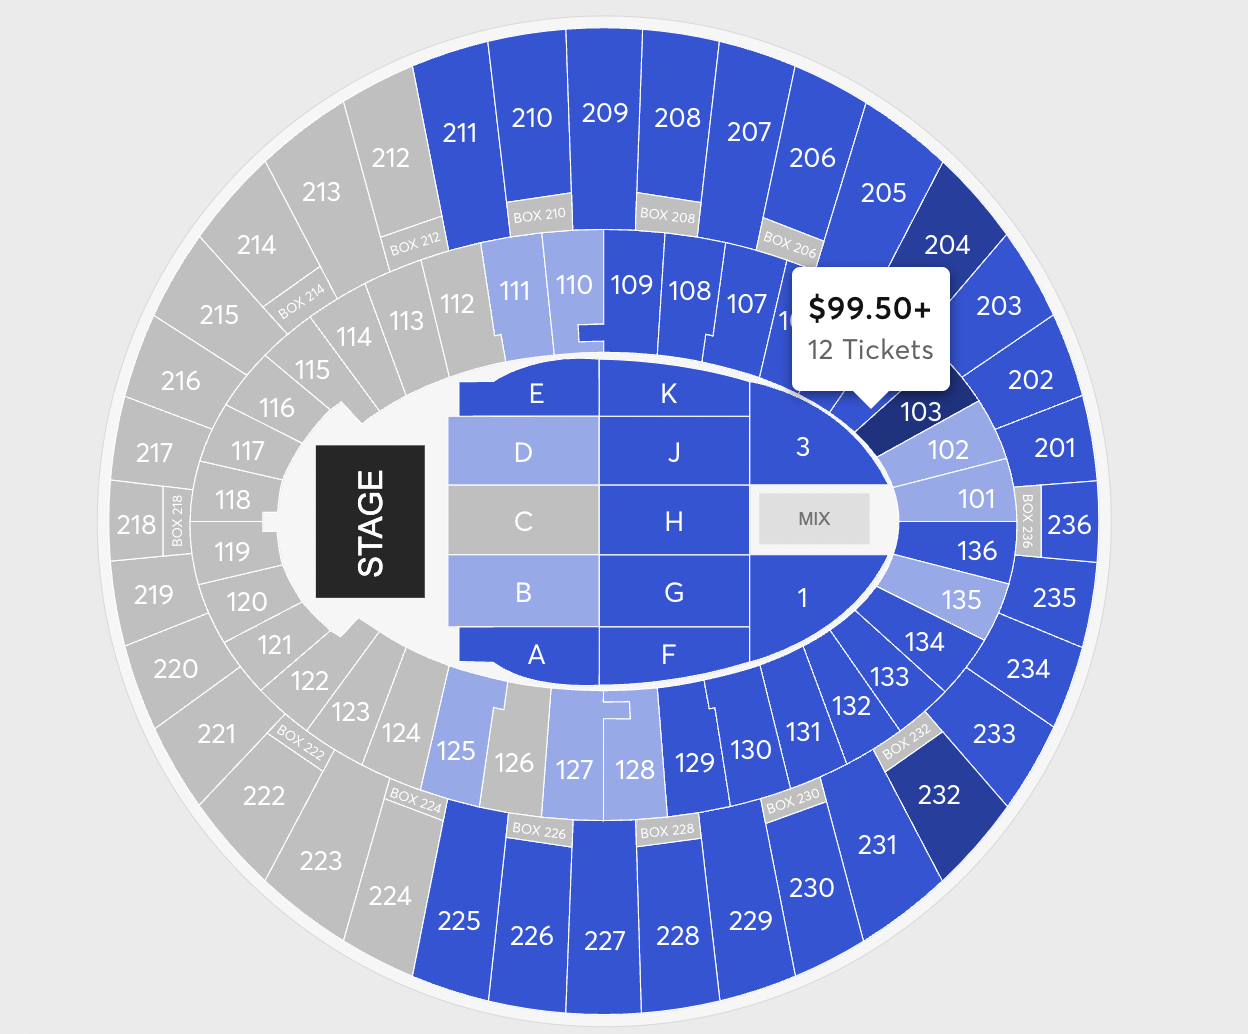 Tickets are as low as $29 and as high as $350 to see Meghan Trainor at the Kia Forum